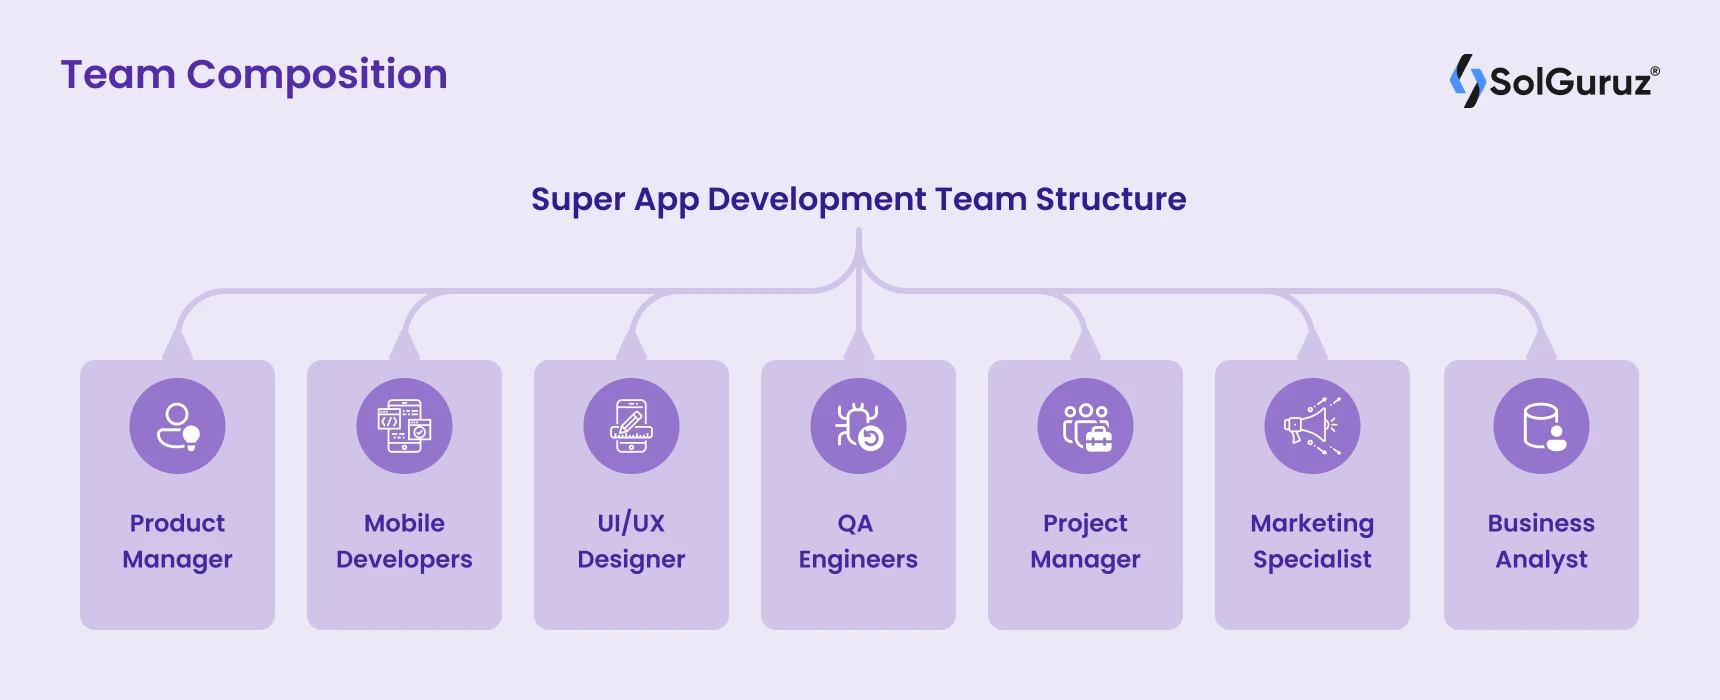 Team Composition required for the Super App Development